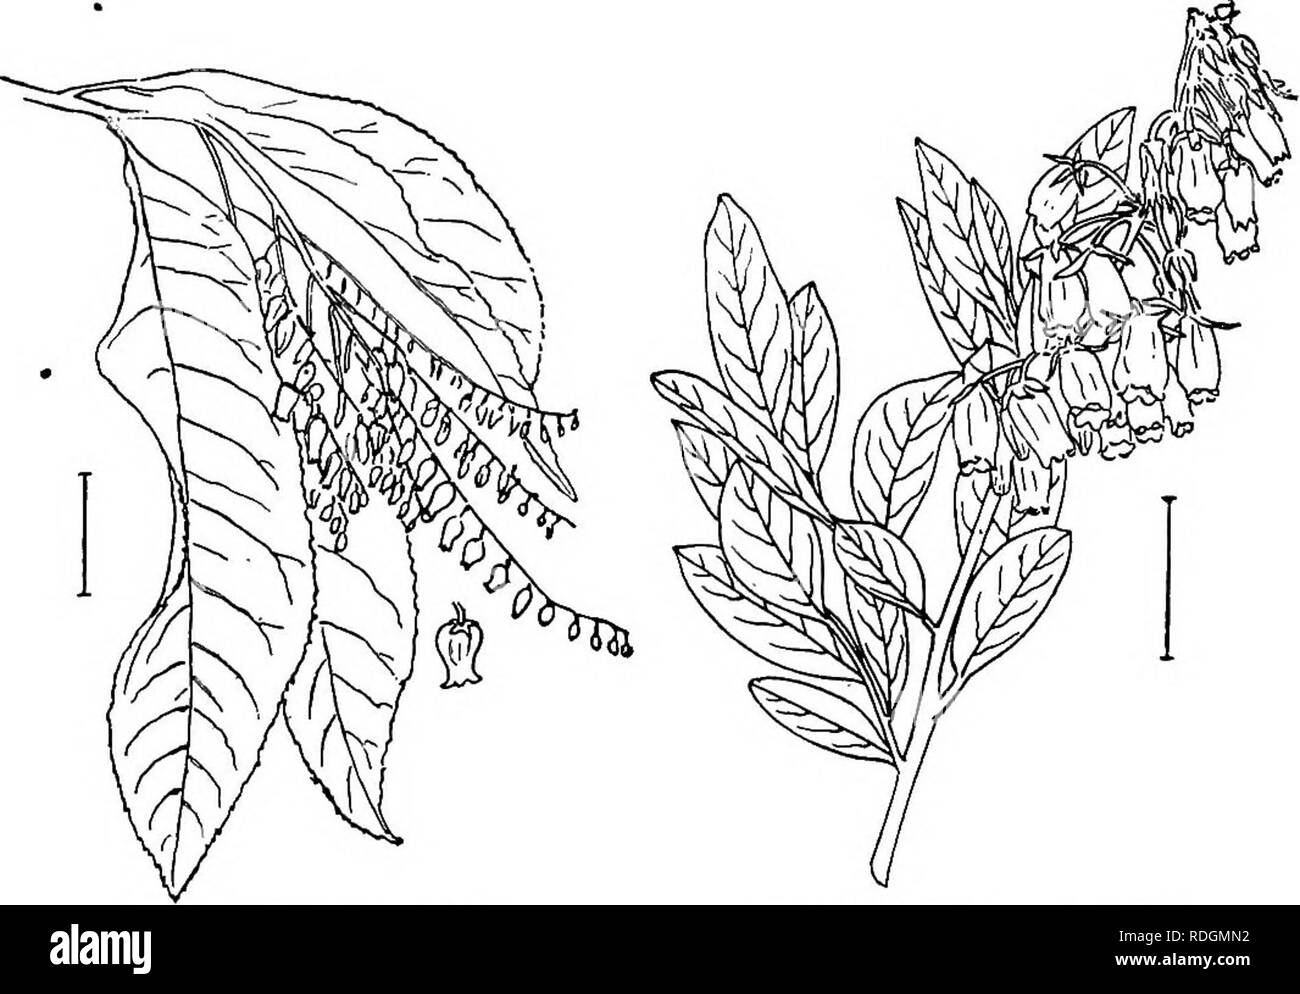 . Ornamental shrubs of the United States (hardy, cultivated). Shrubs. 252 DESCRIPTIONS OF THE SHRUBS. Fig. 427. — Sourwood. Fio. 428. — Stagger-bush. KEY TO THE ANDROMEDA-LIKE SHEUBS * Leaves thick and evergreen (Privet Andromeda of the 2d * is nearly evergreen). (A.) A. Flowers very small,  inch long, globular, nodding and clus- tered in axils of somewhat reduced leaves, Feb.-April. Shrub or tree with scurfy twigs, 5-25 feet tall. Scurfy Andromeda (417) — Andromeda (Xolisma) ferruglnea. A. Flowers more elongated ^usually twice as long as wide. (B.) B, Flowers in one-sided racemes. (C.) C. Fl Stock Photo